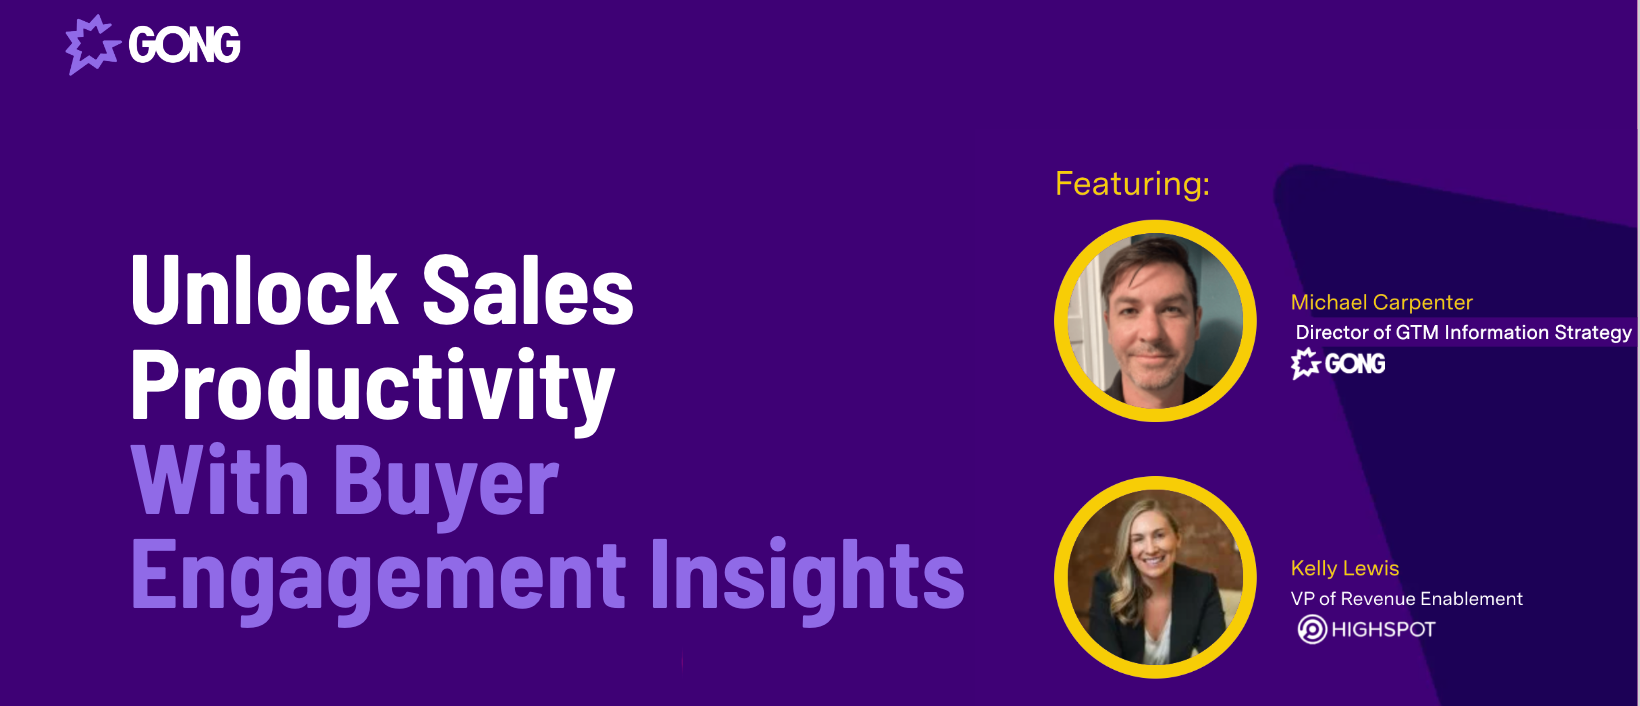 Tips from ‘Unlock Sales Productivity With Buyer Engagement Insights’